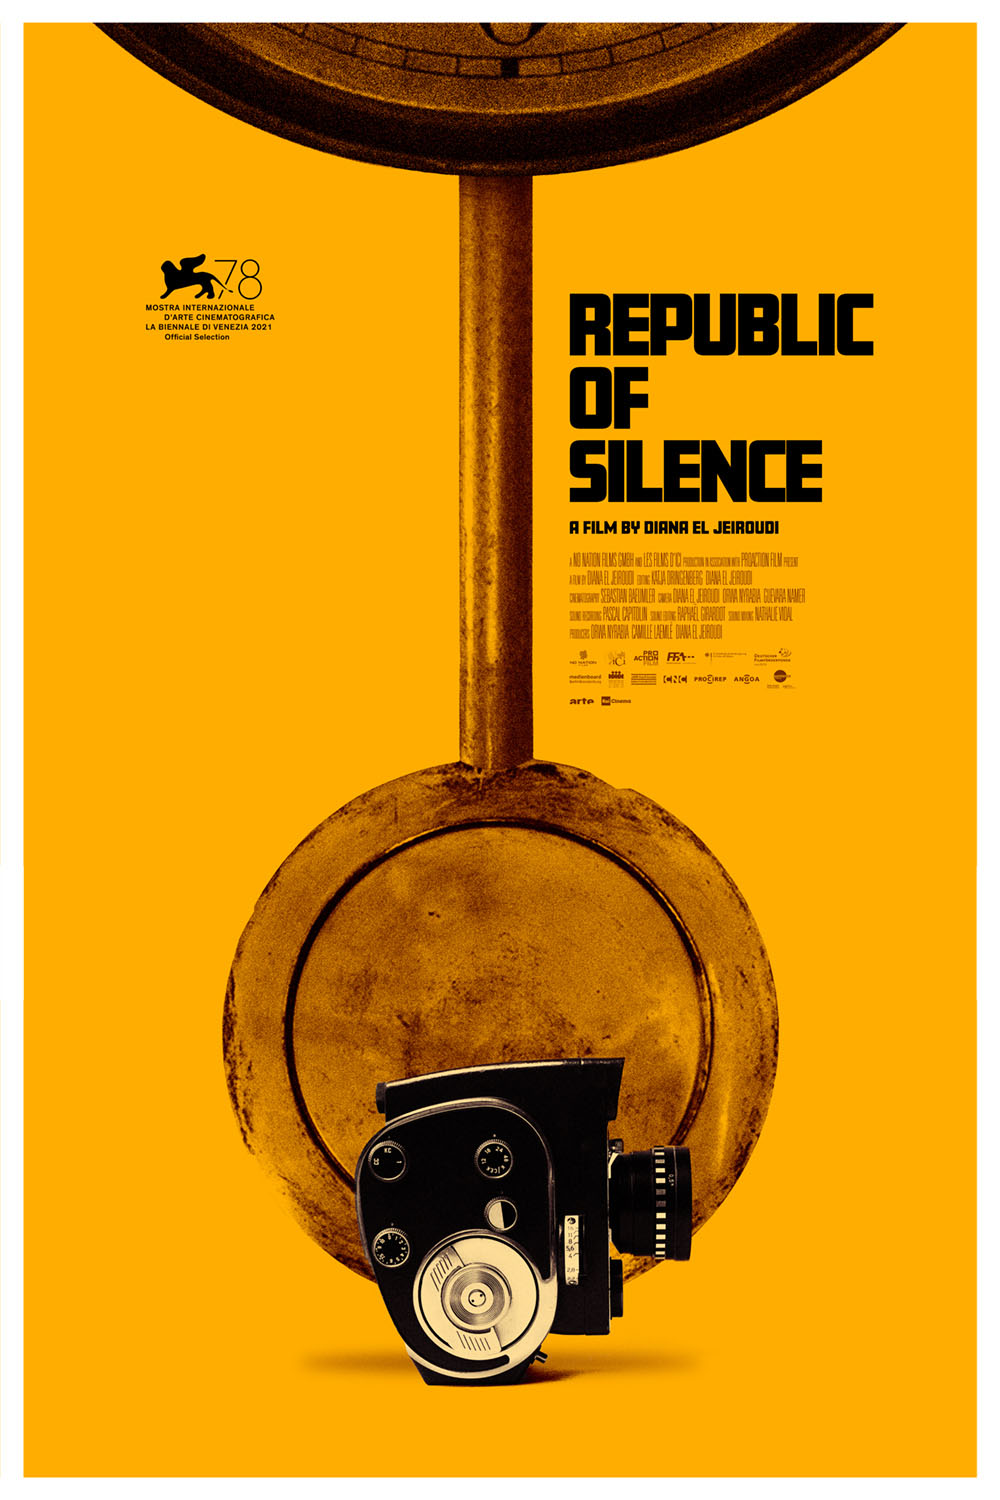 Movie poster for Republic of Silence, old film camera